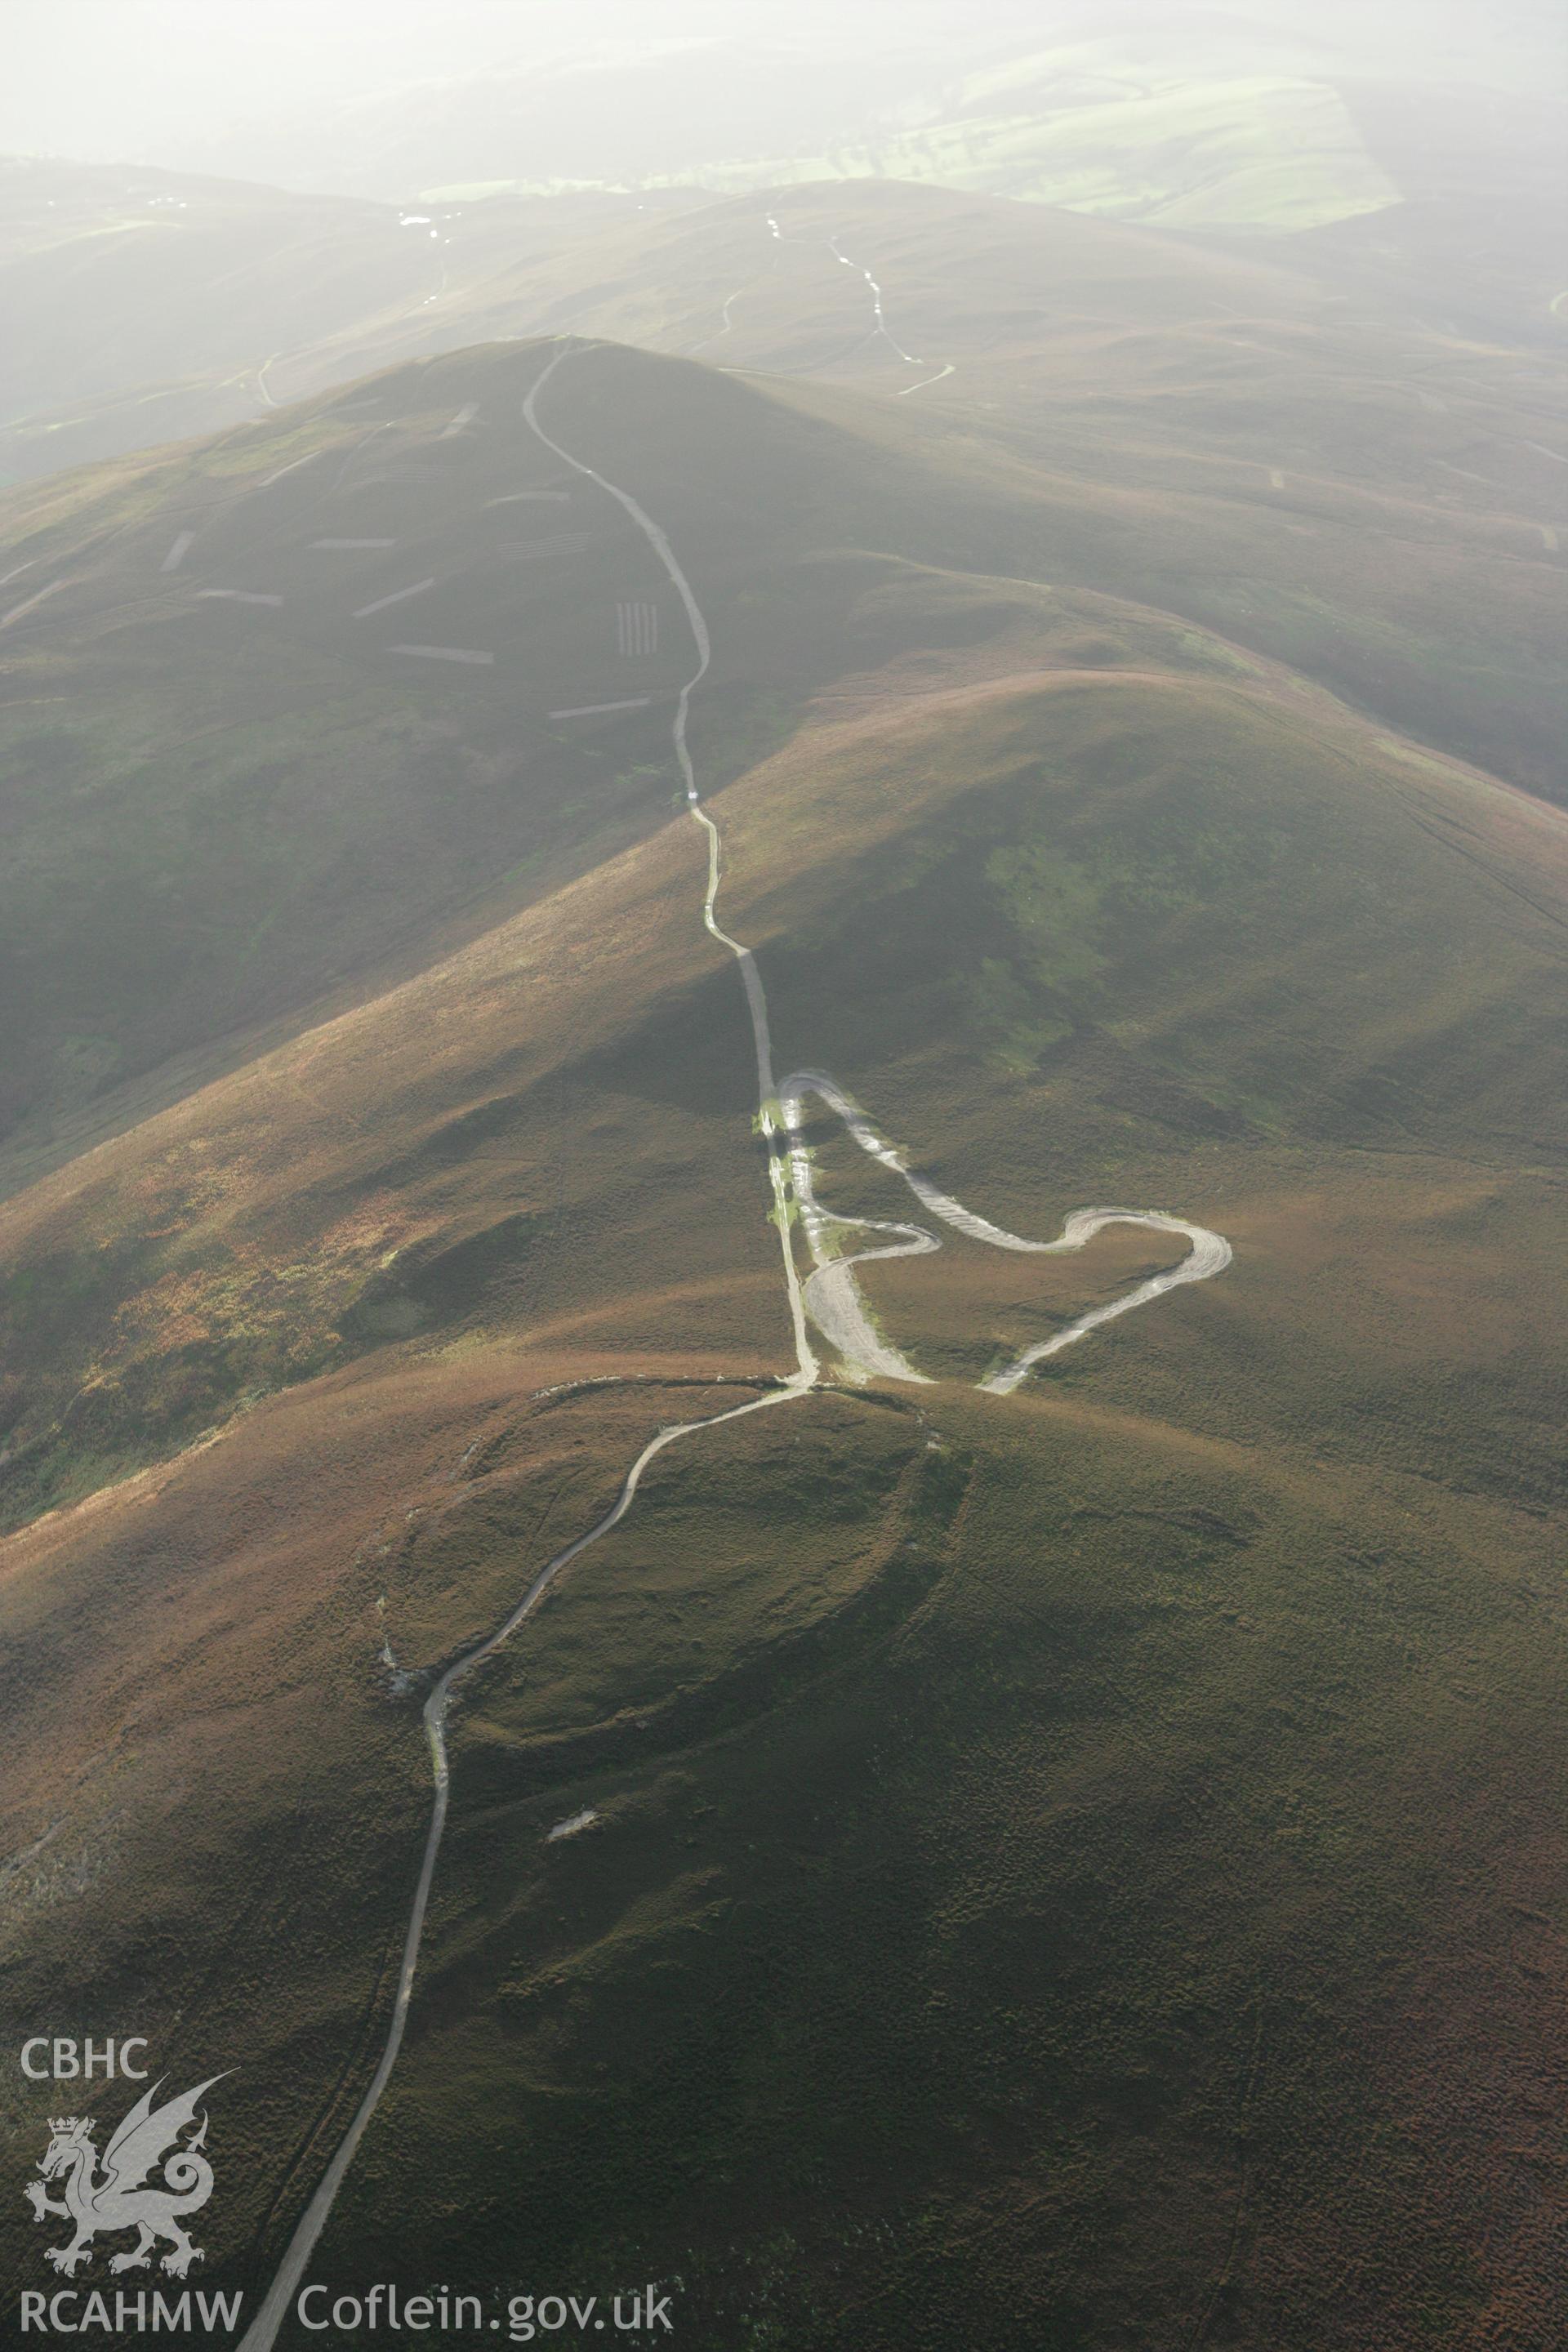 RCAHMW colour oblique photograph of Moel y Gaer hillfort. Taken by Toby Driver on 30/10/2007.